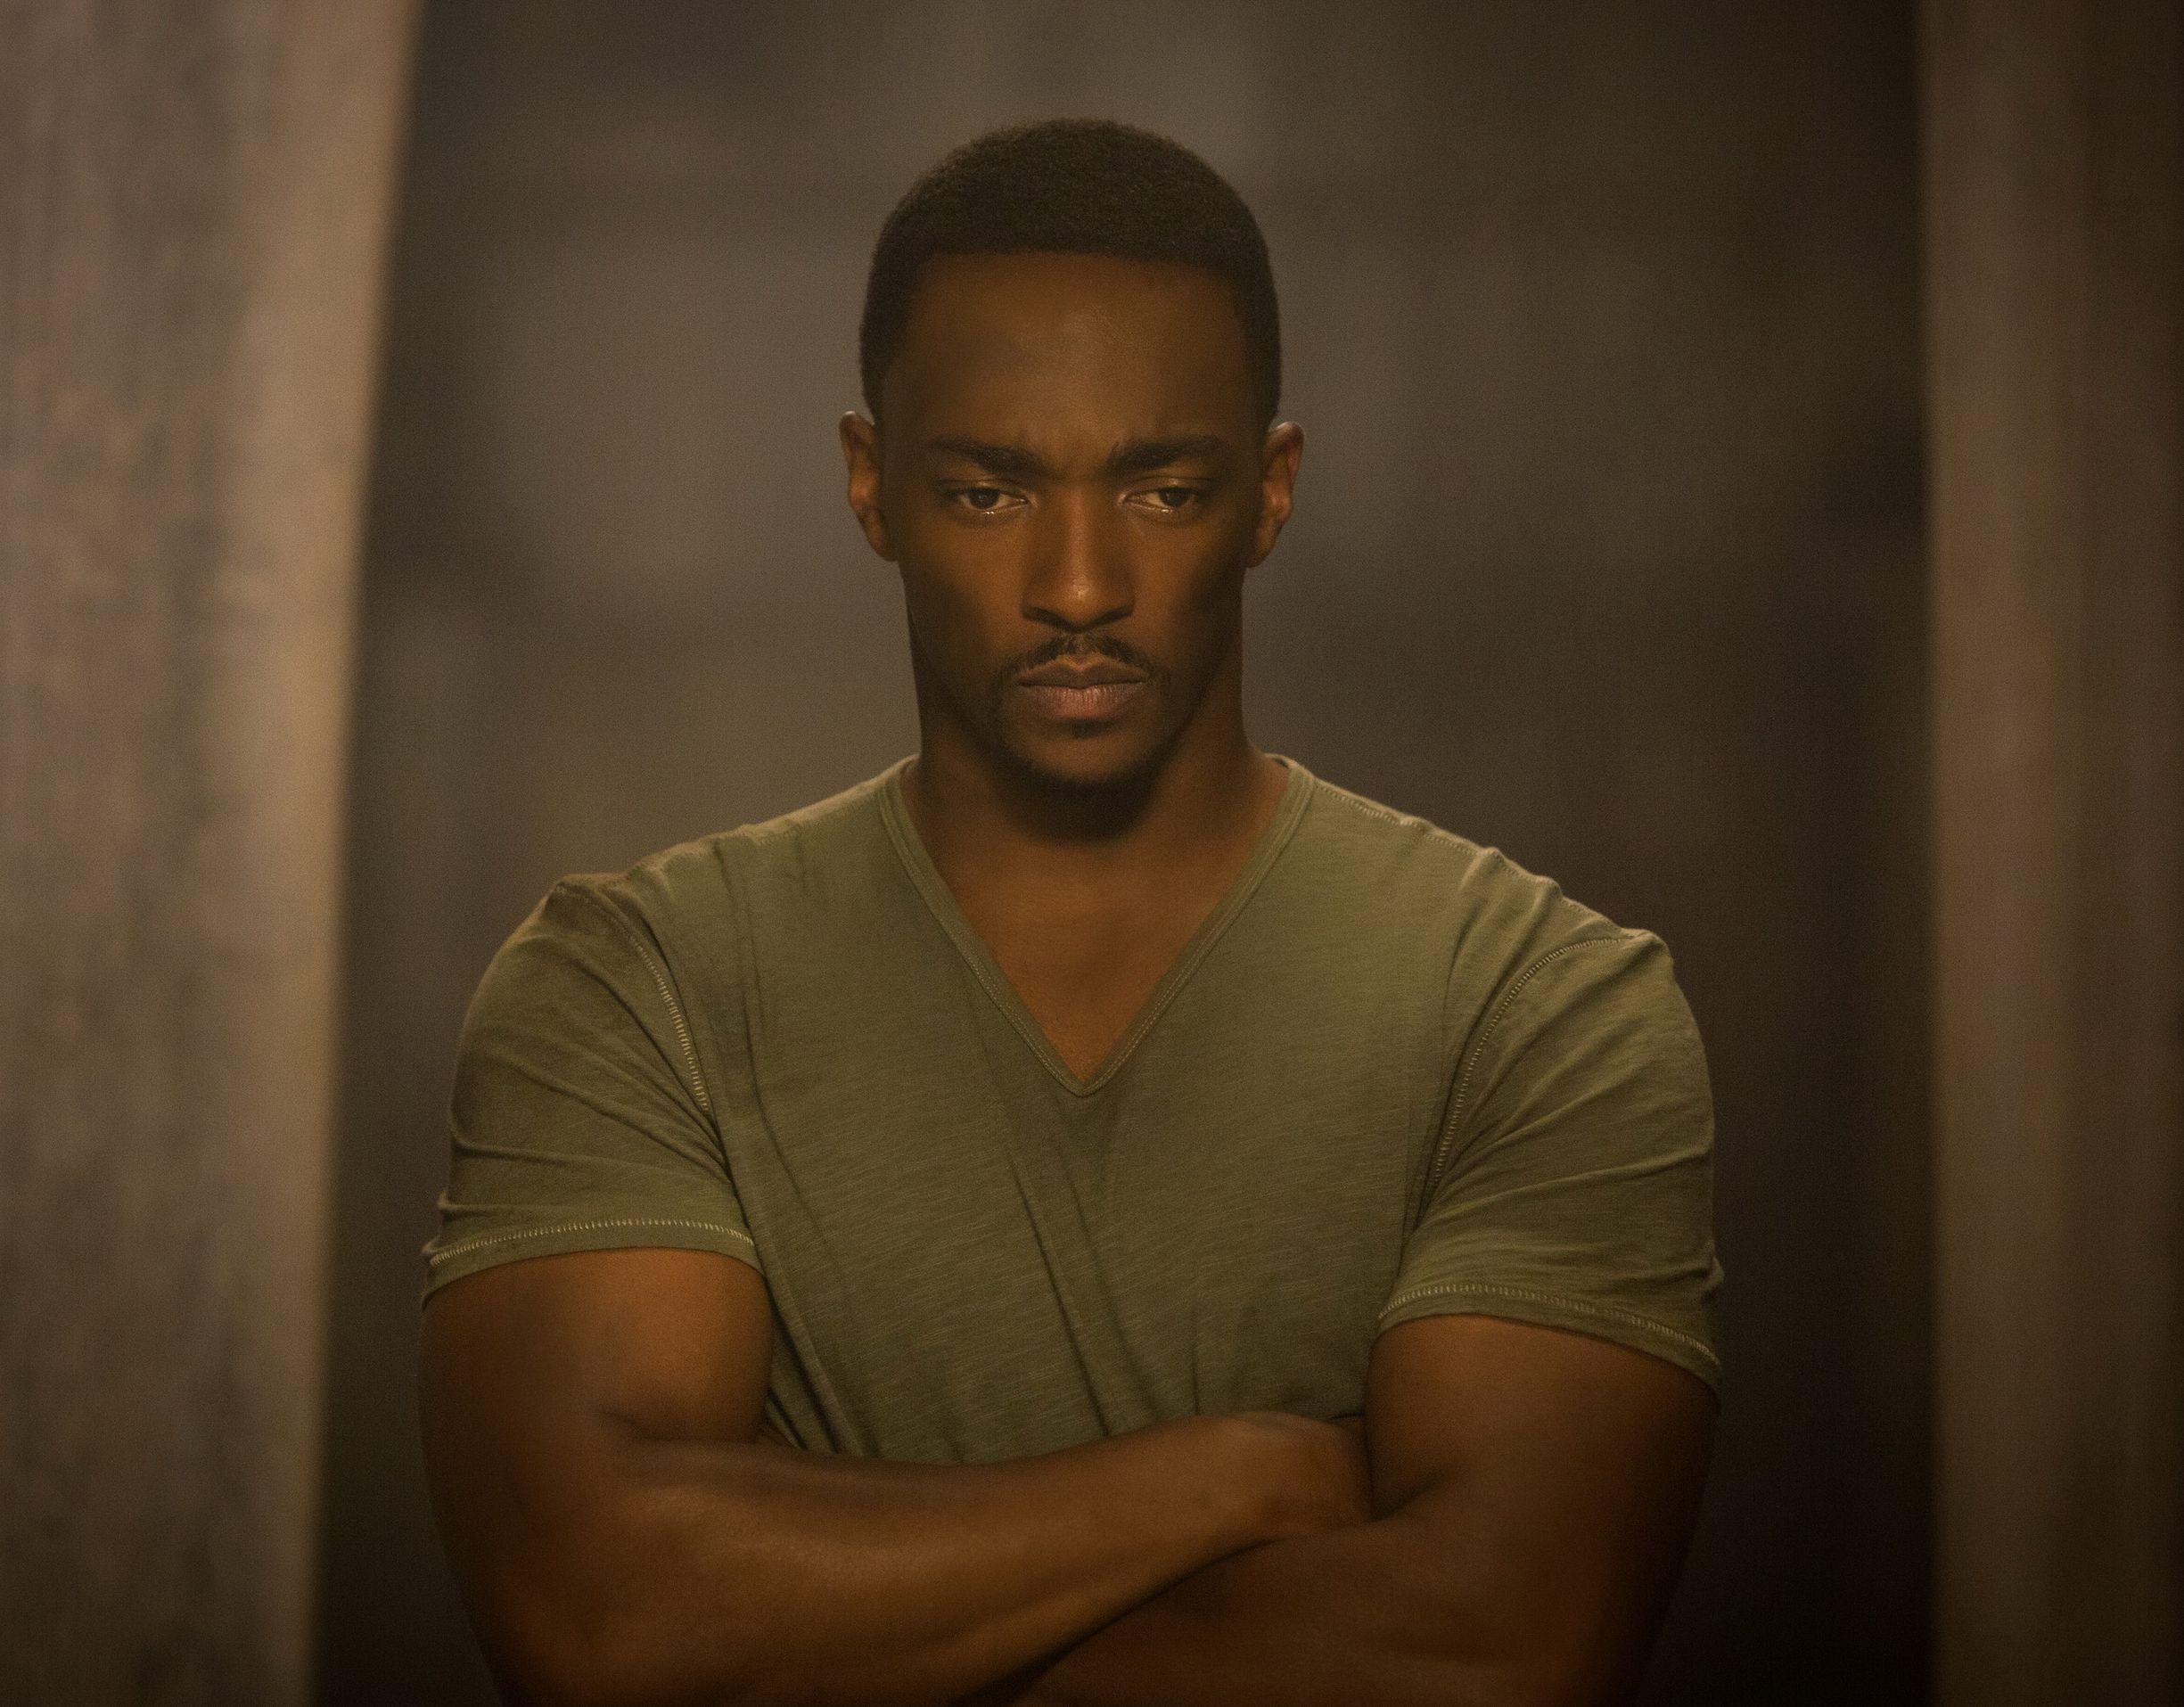 Anthony Mackie in Captain America: The Winter Soldier